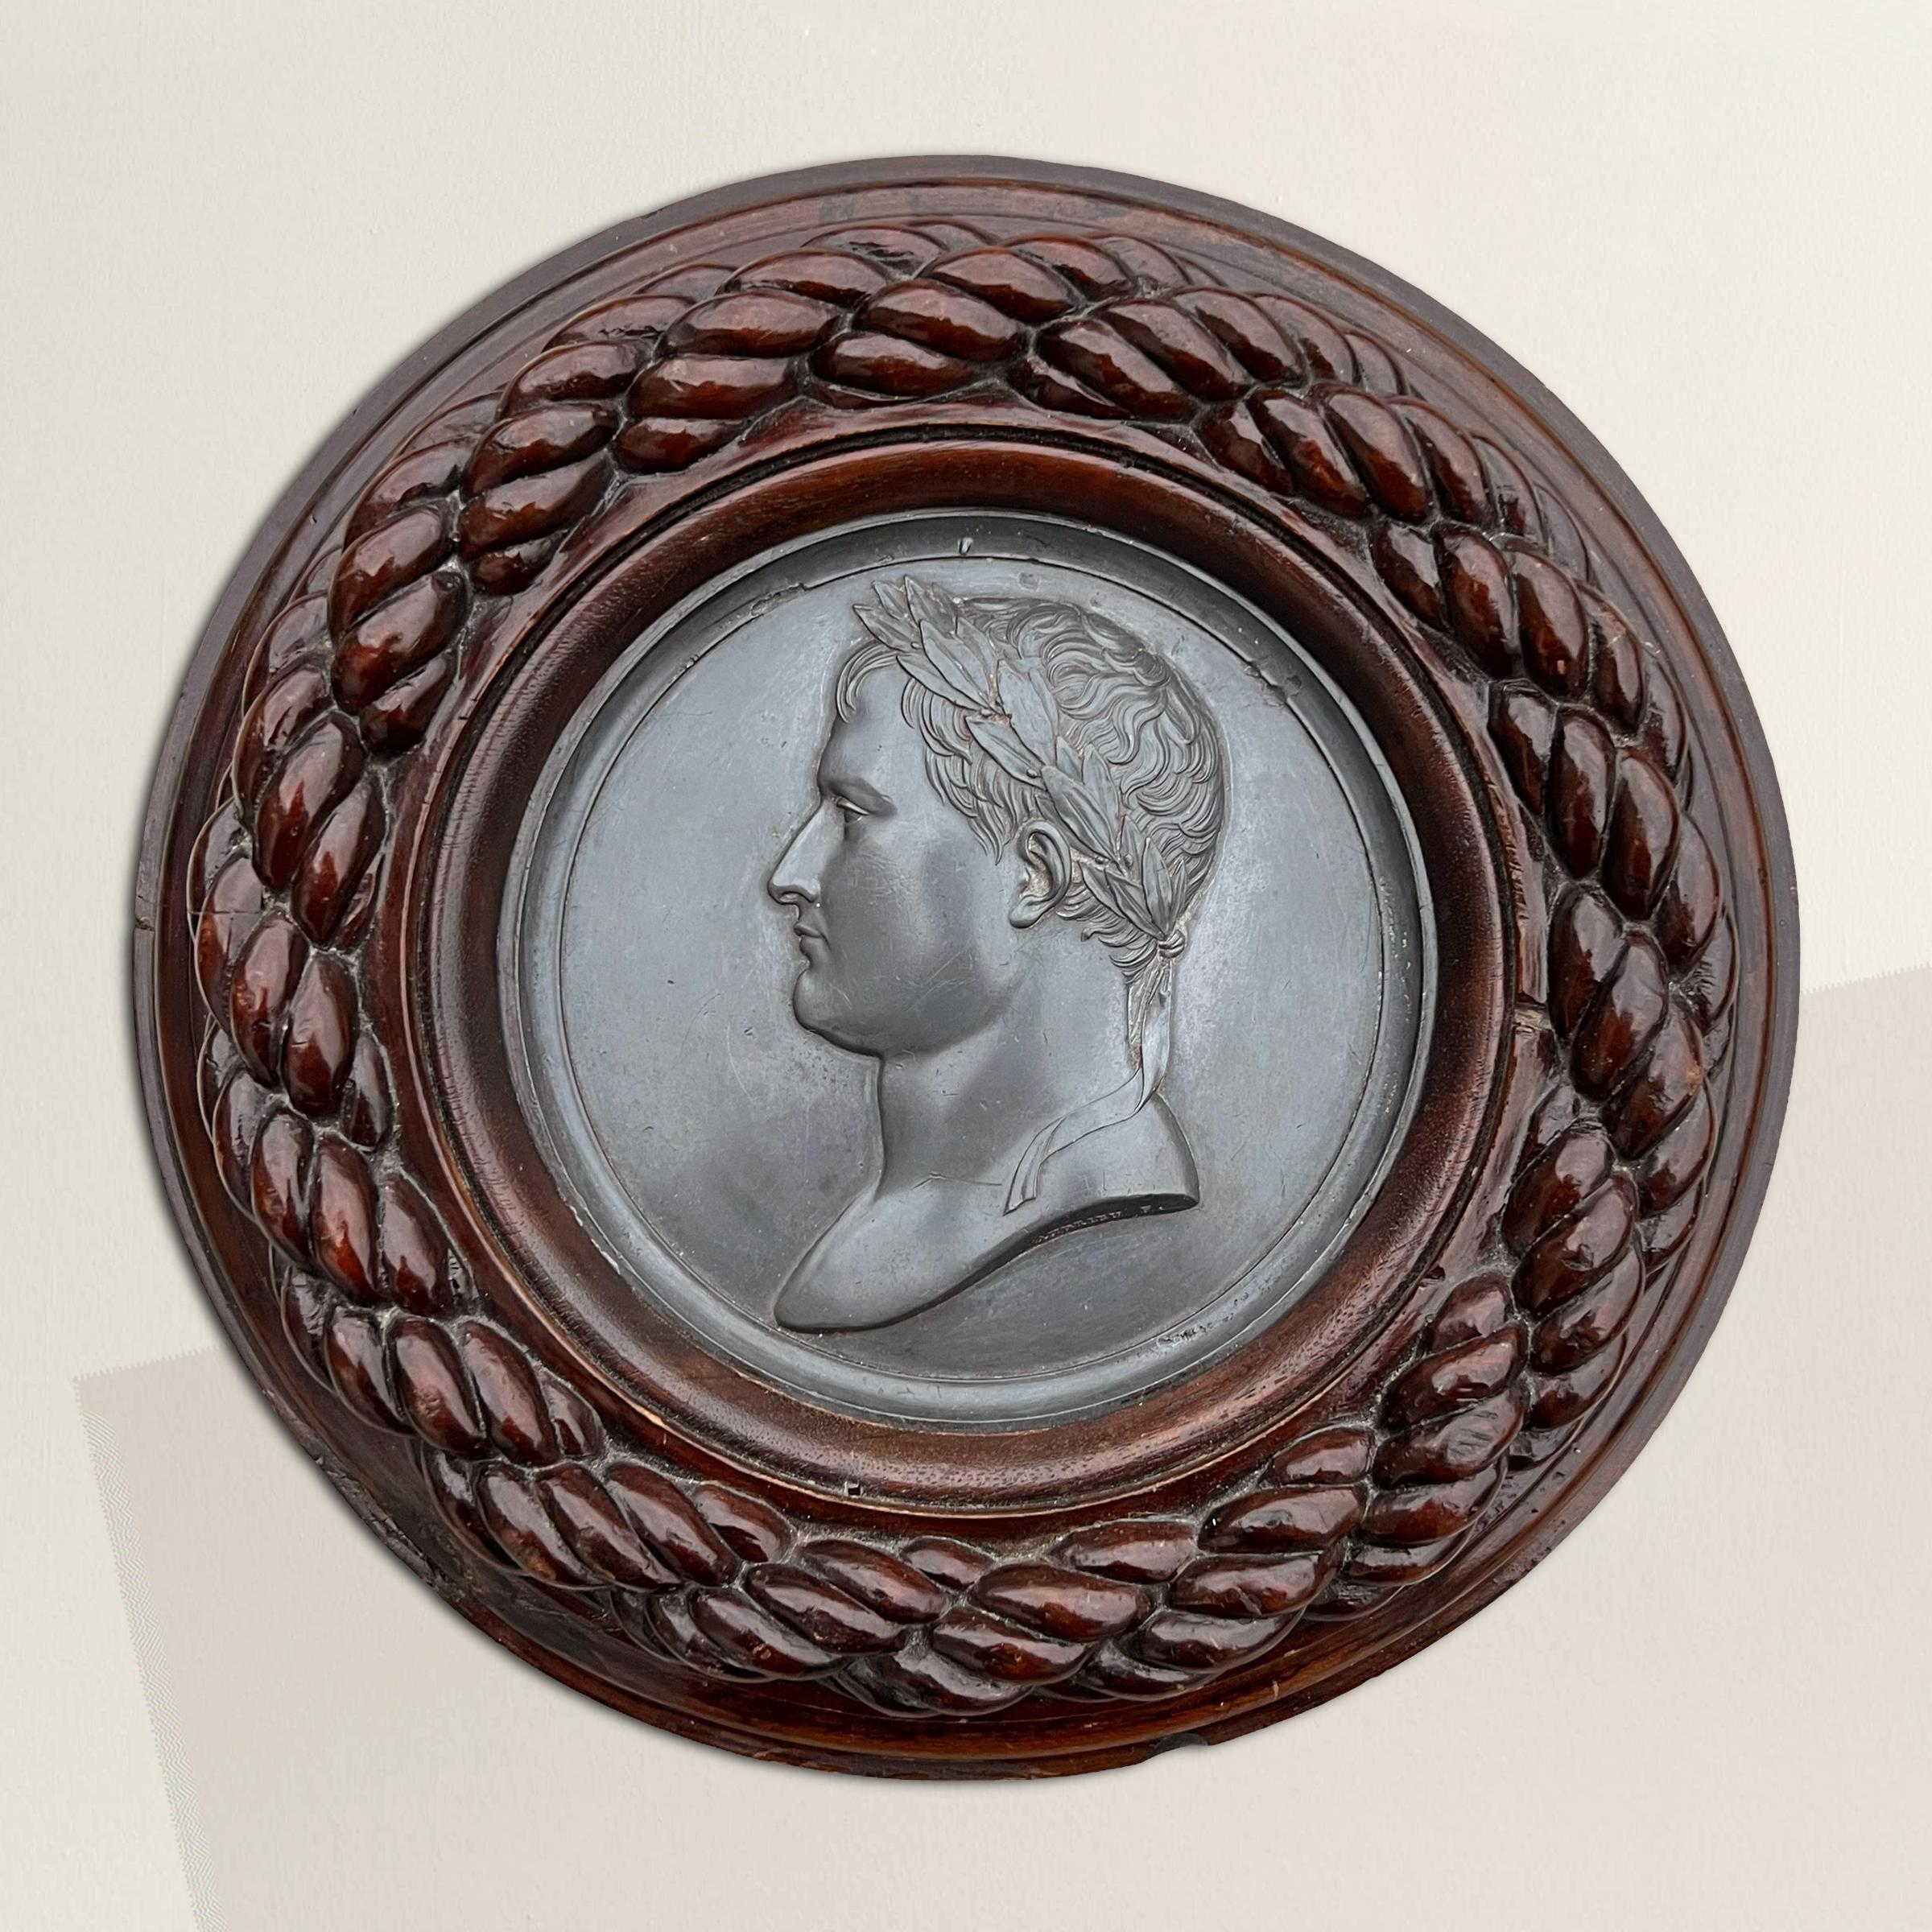 This early 19th-century French round cast pewter medallion, a masterpiece by Bertrand Andrieu (1761-1822), captures the Napoleonic era's essence. The laurel-crowned Napoleon, reminiscent of Roman emperors, symbolizes imperial grandeur. Andrieu's